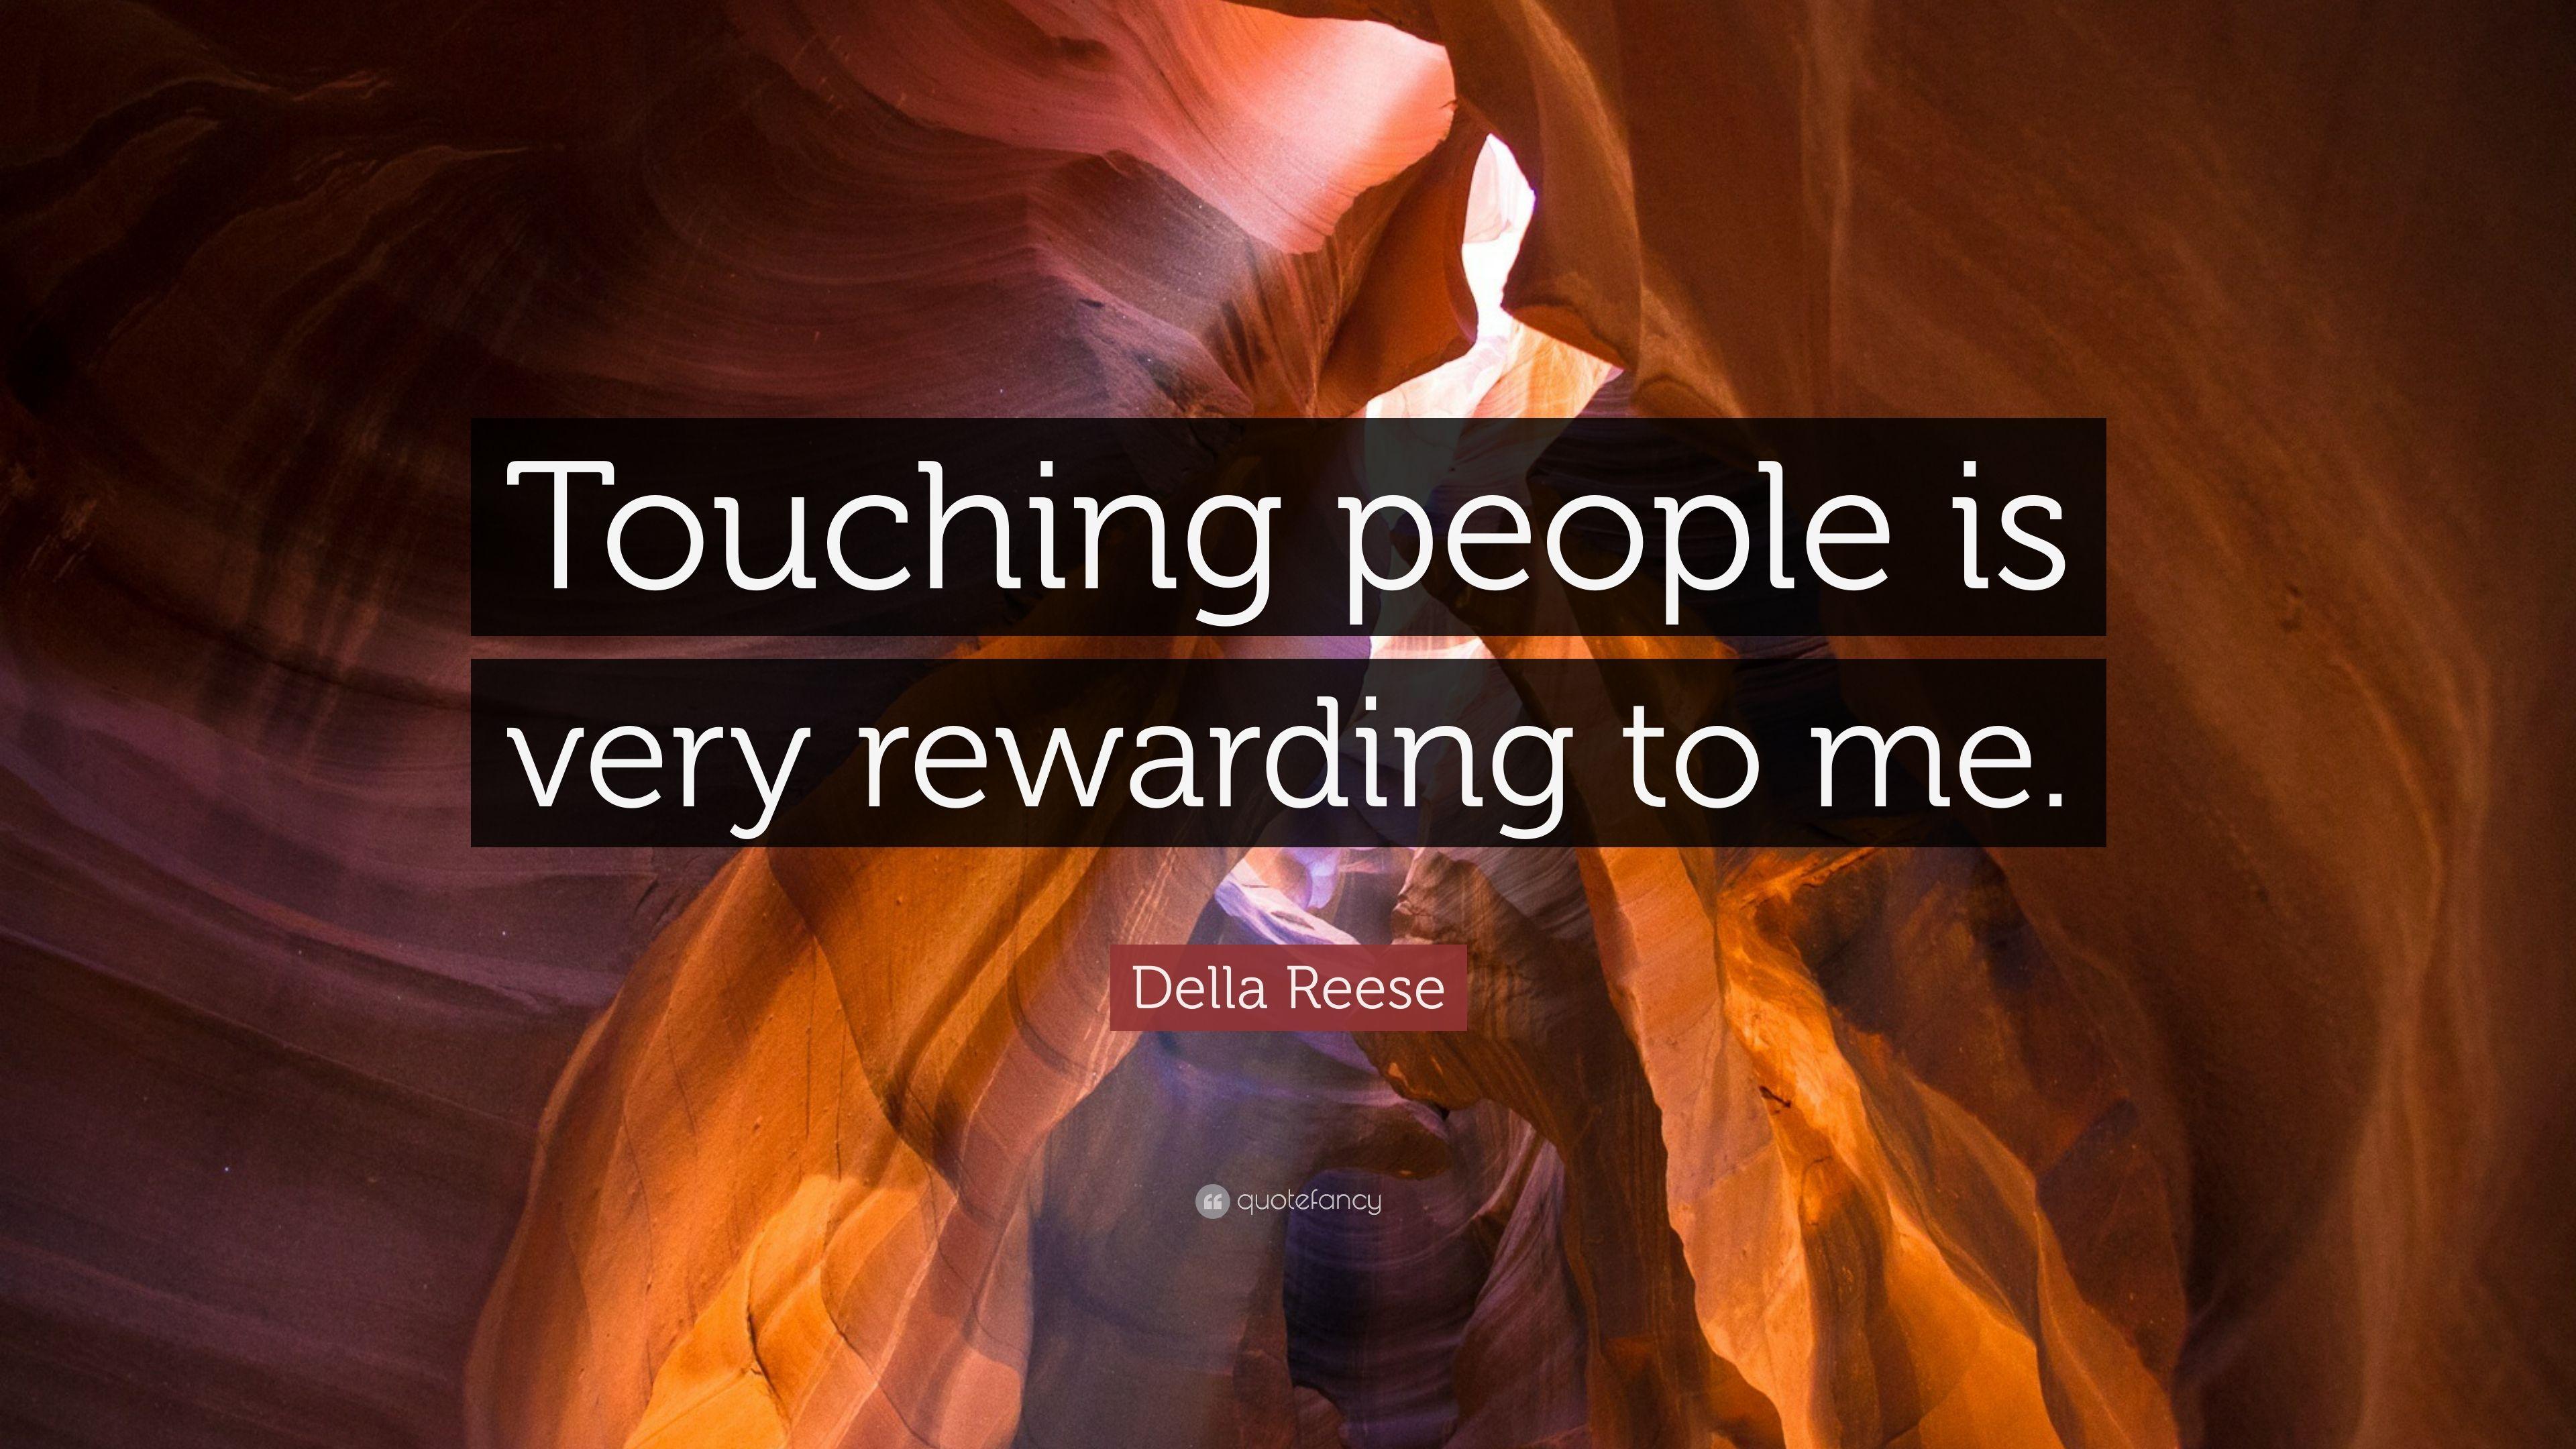 Della Reese Quote: “Touching people is very rewarding to me.” 5